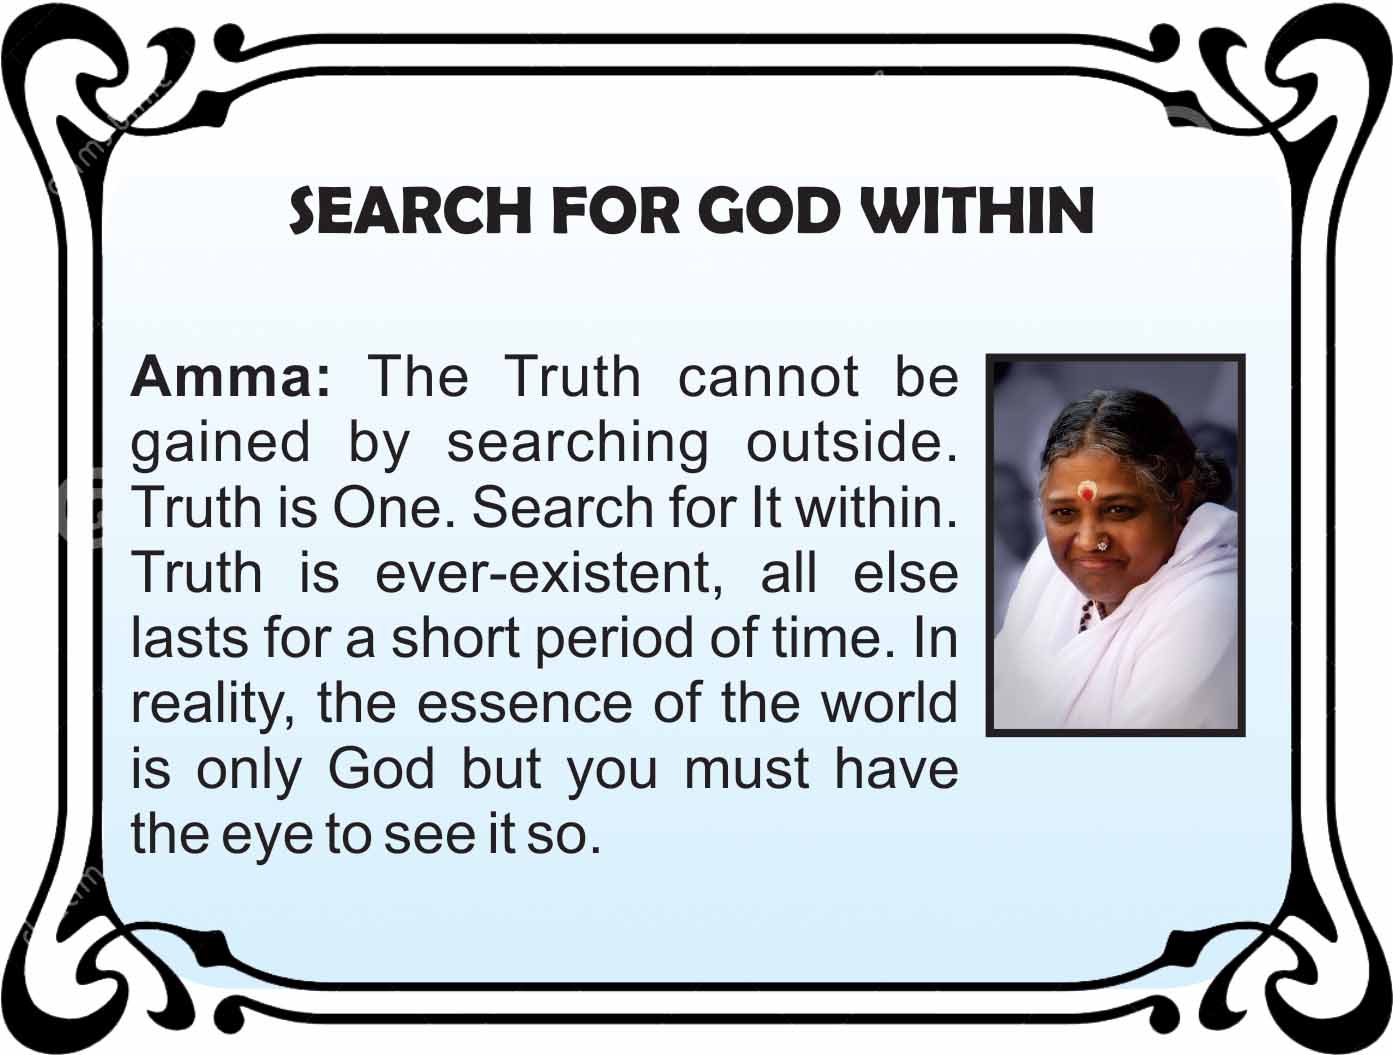 Search within